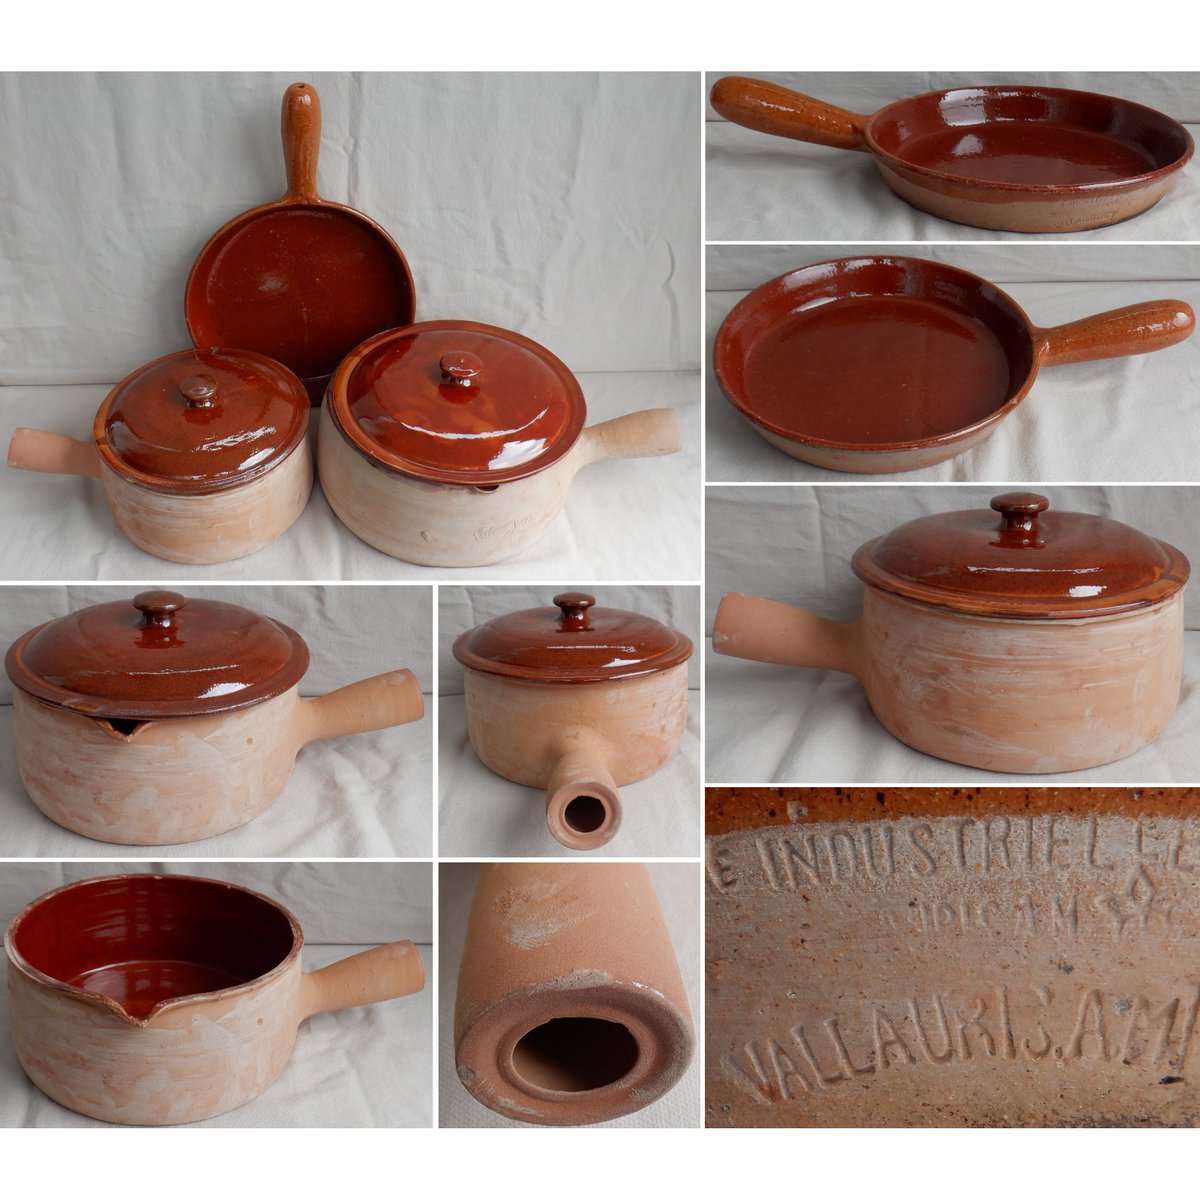 Vintage Vallauris terracotta clay poelon casserole dishes and a saucepan. Made in France. 👨‍🍳🇫🇷

🛒 ebay.co.uk/itm/3054951960…

#Vintage #FrenchVintage #Vallauris #FollowVintage #eBay